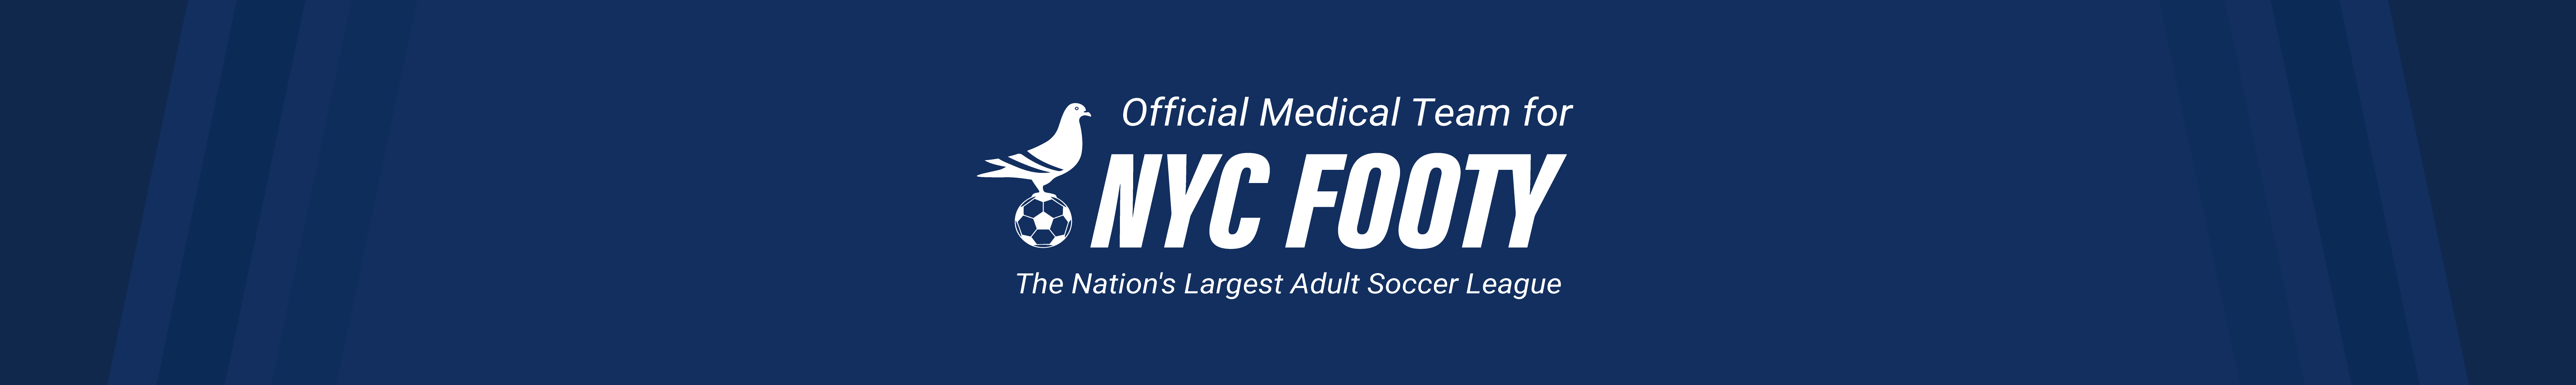 NYC Footy: The Nation's Largest Adult Soccer League partners with NY Orthopedics